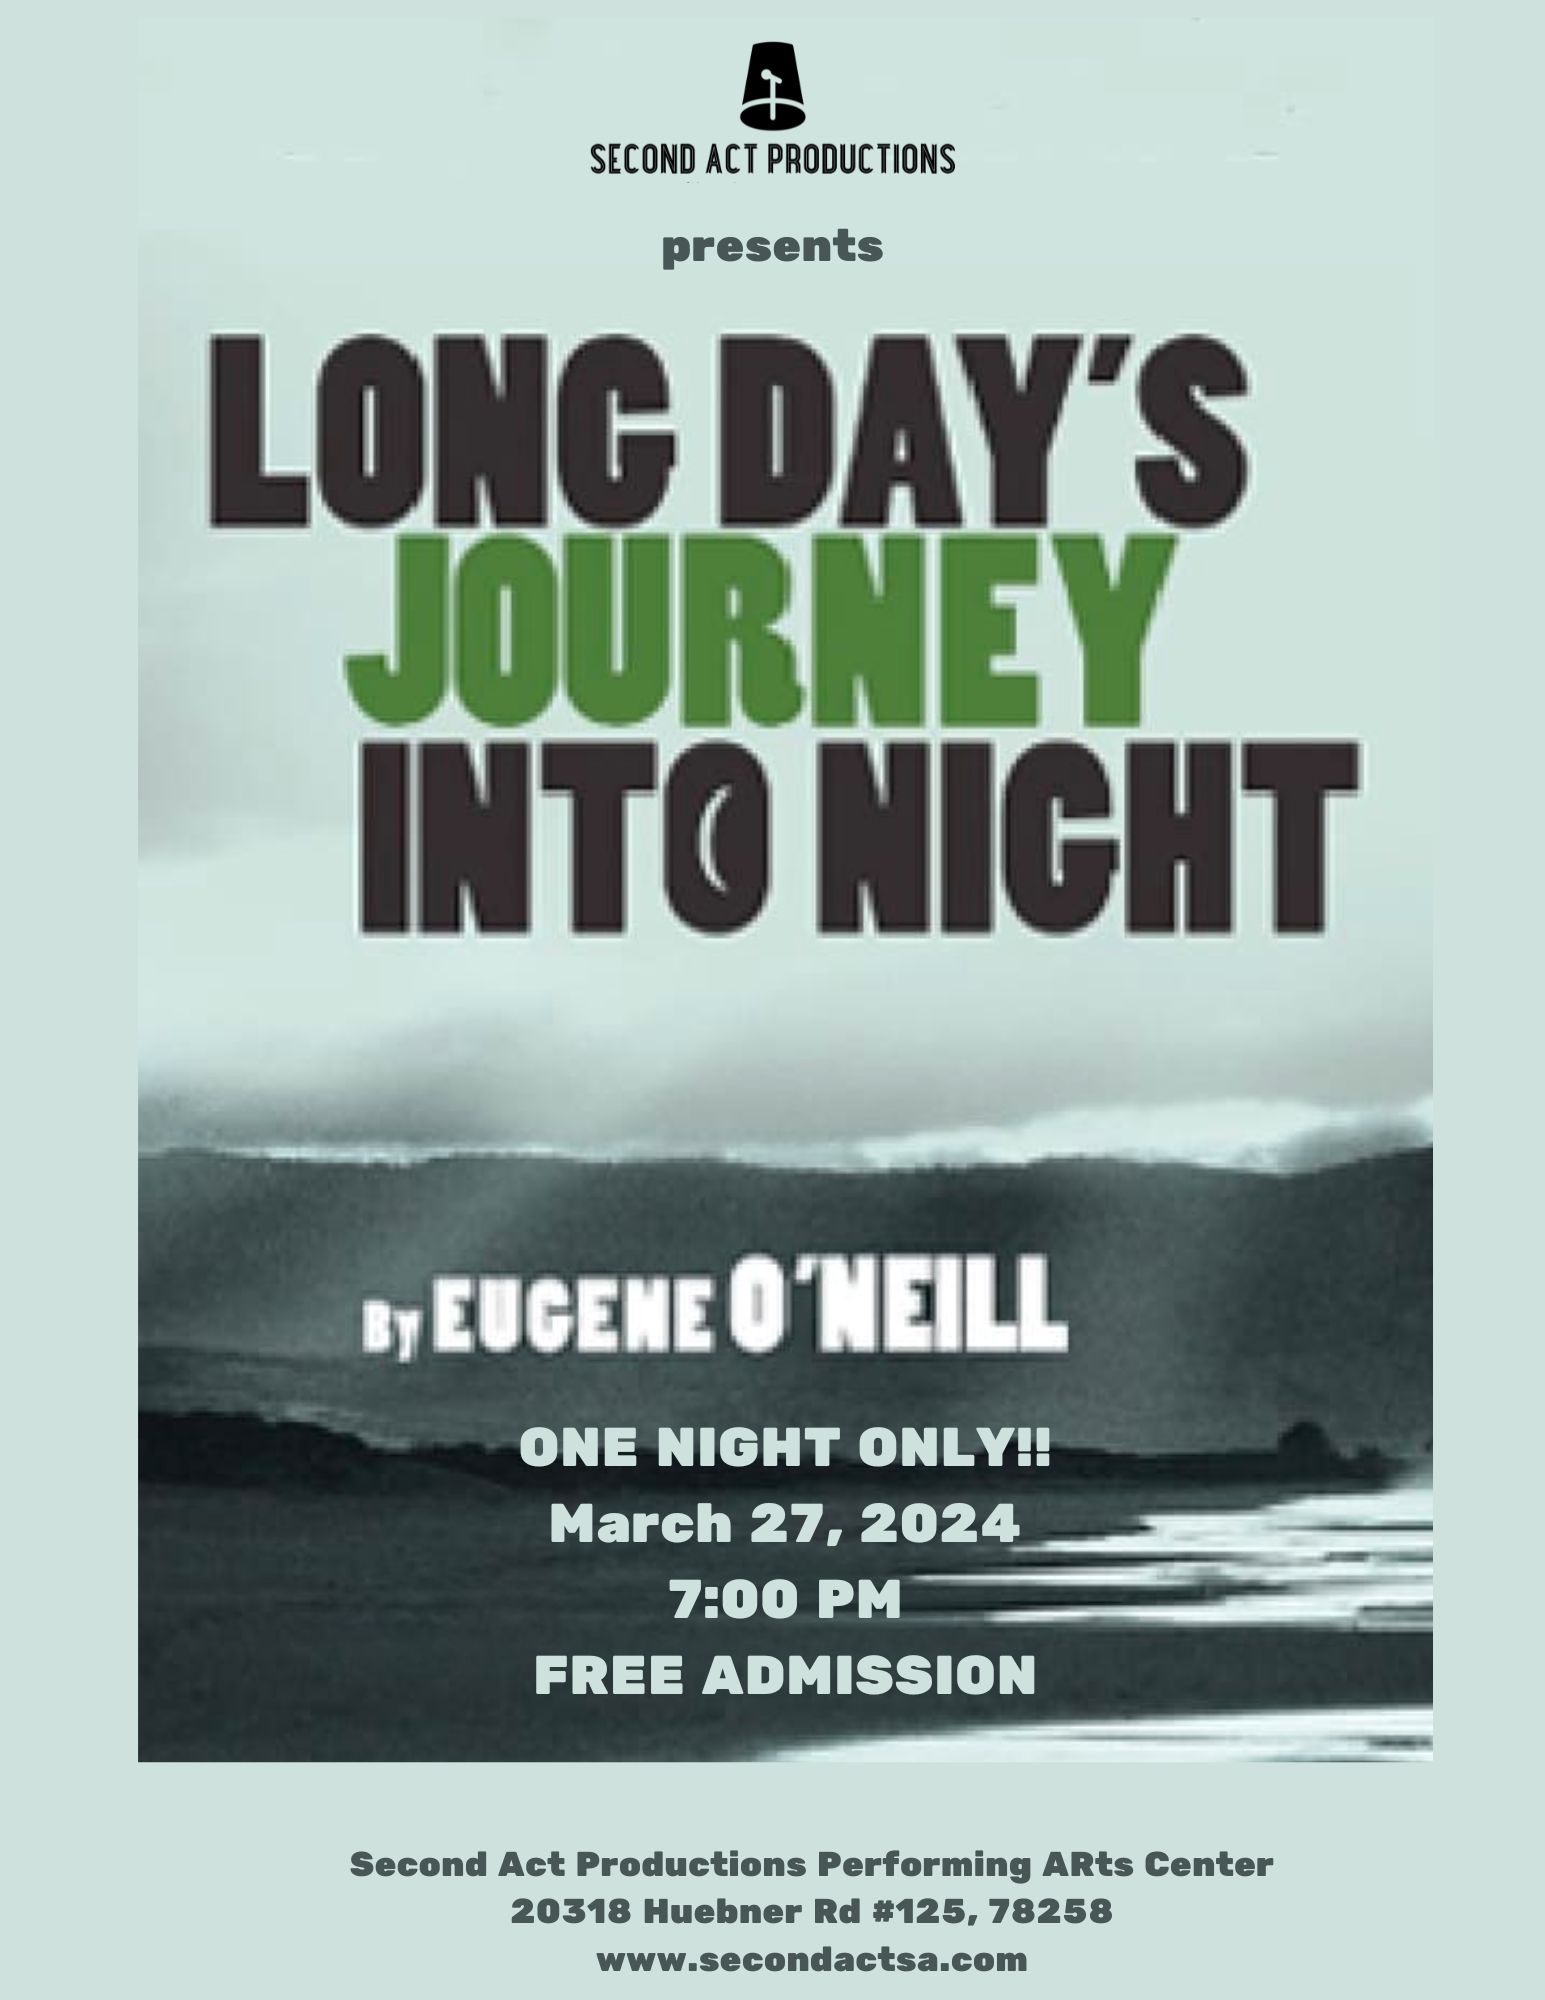 Long Day's Journey into Night by Second Act Productions